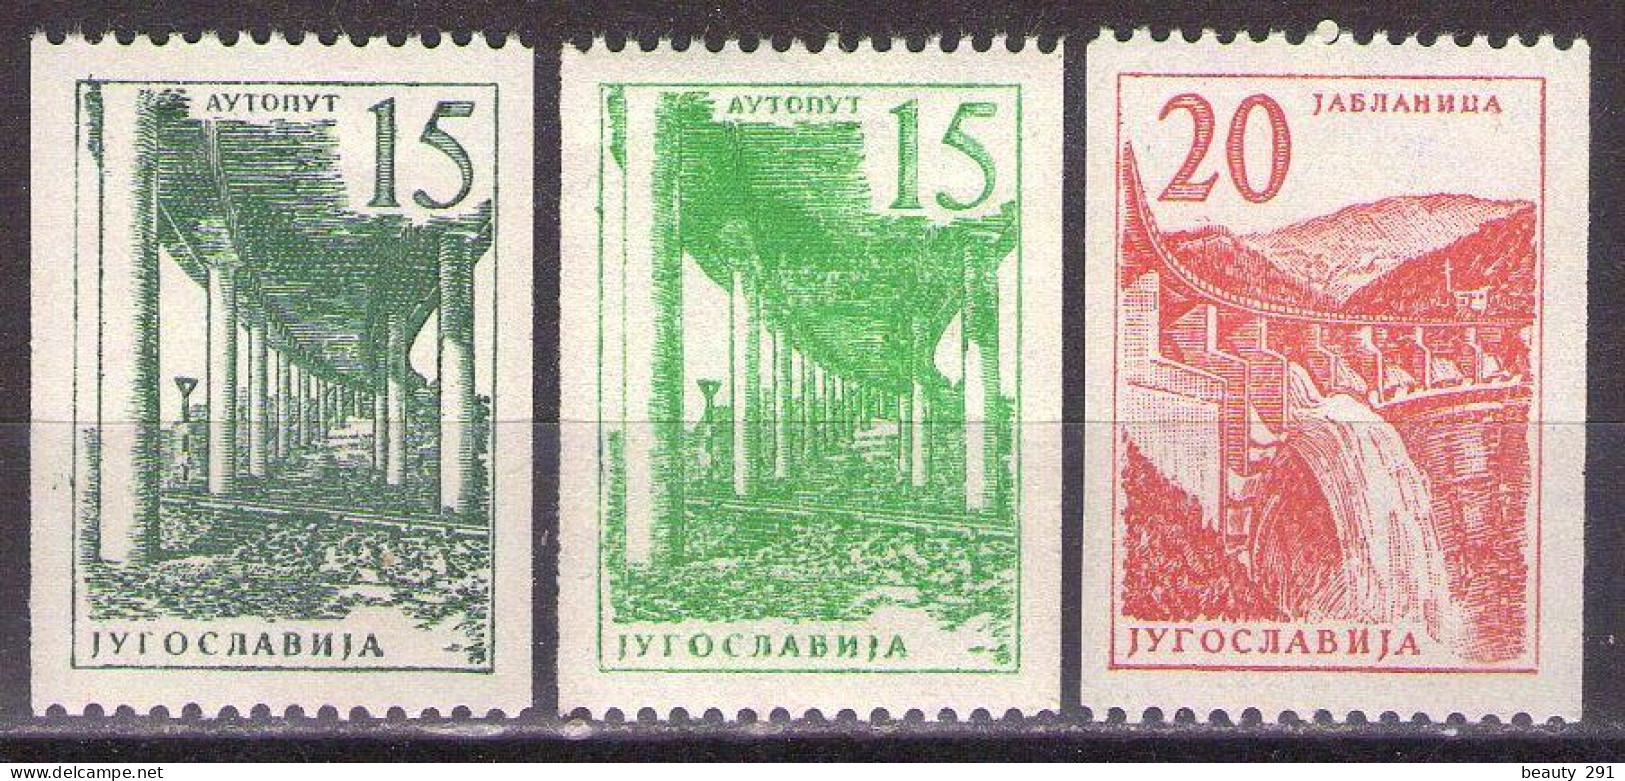 Yugoslavia 1959 - Industry And Architecture Coil Stamps - Mi 898-899a,b - MNH**VF - Ongebruikt